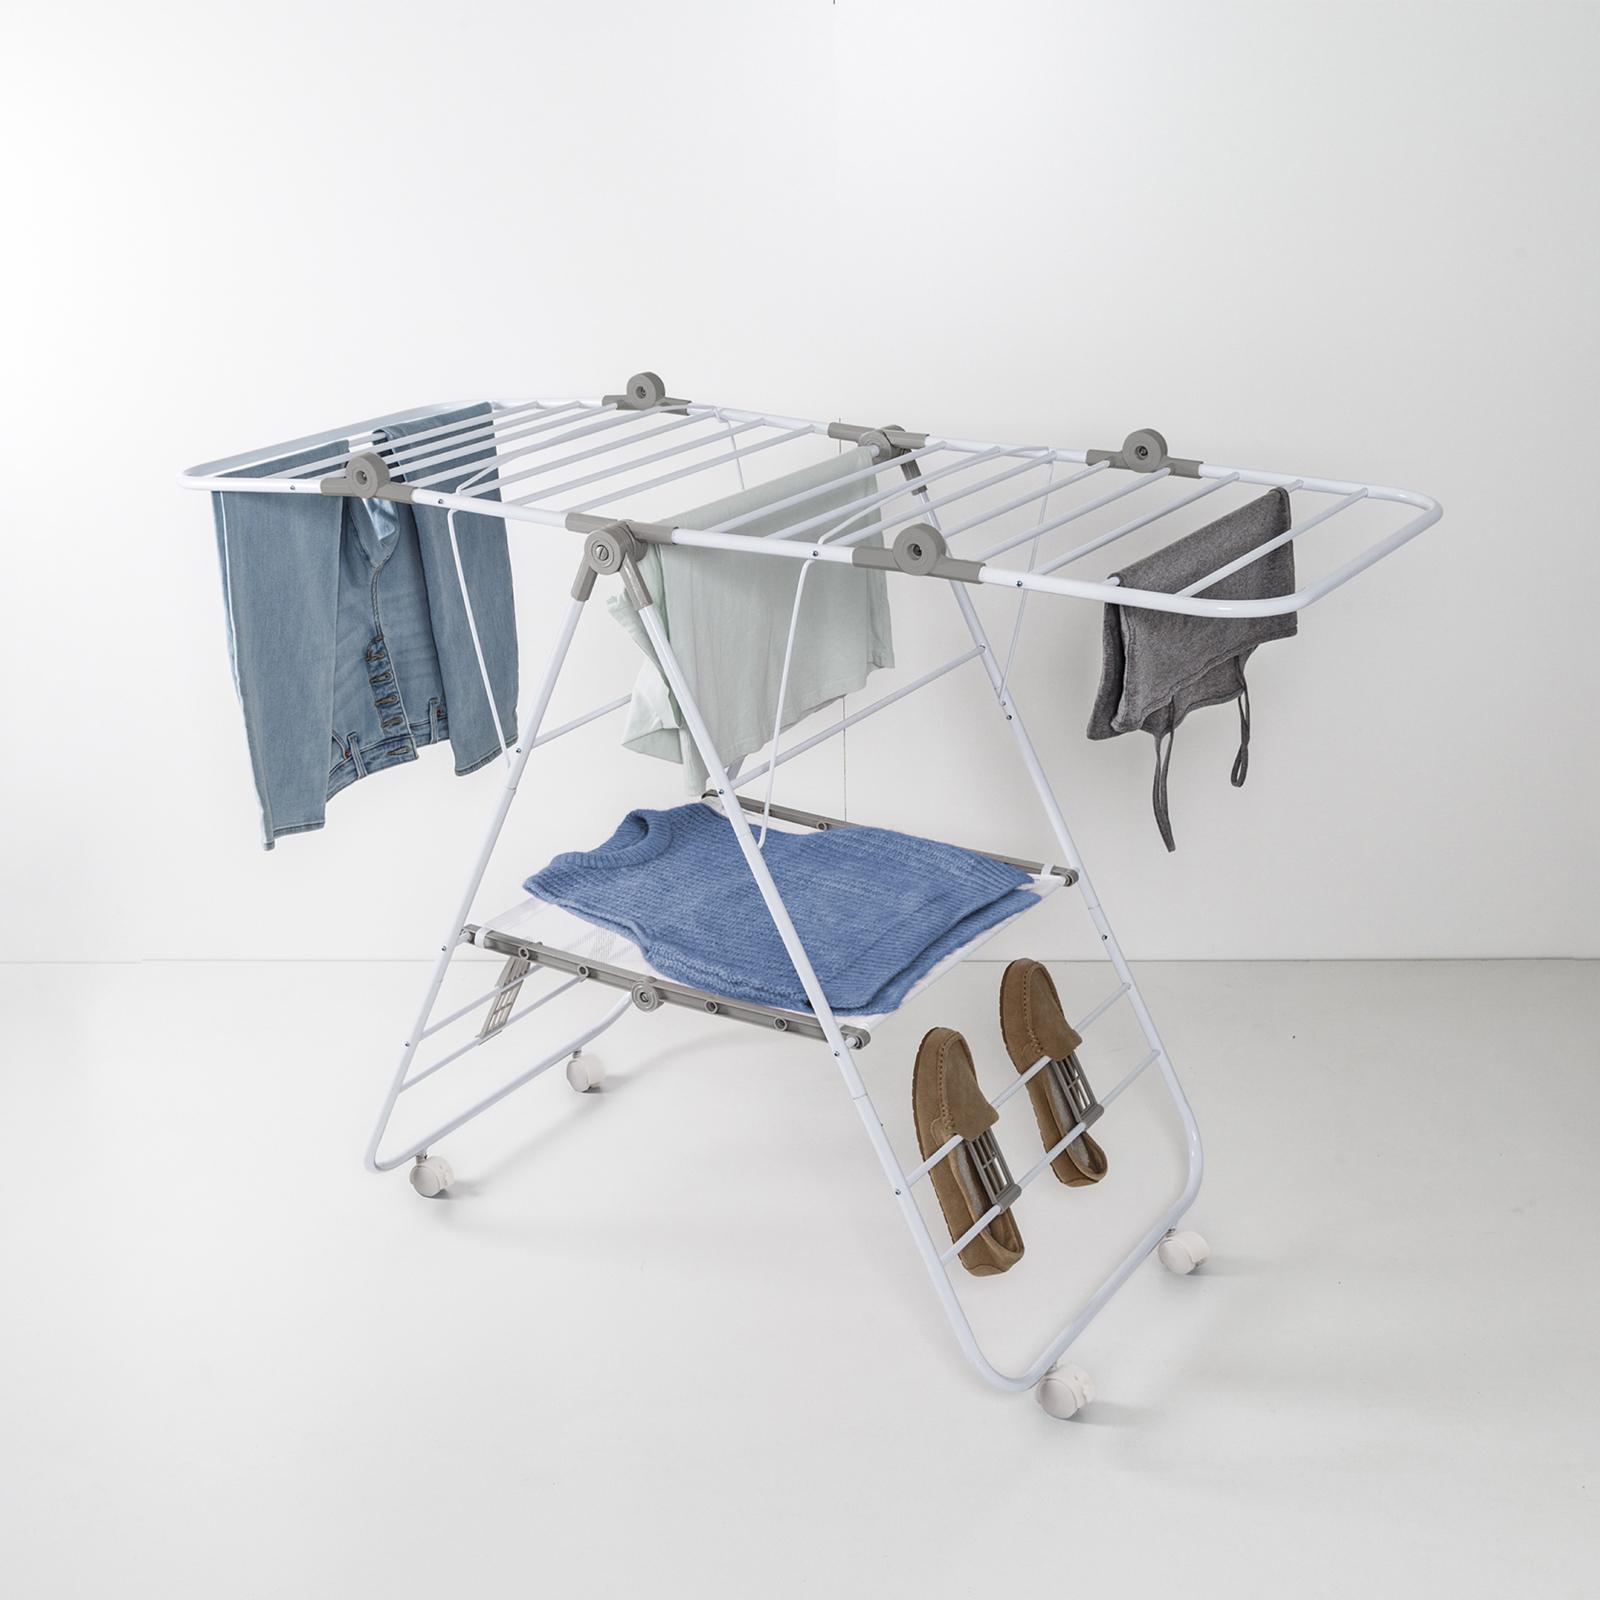 Collapsible Bamboo Laundry Drying Rack Space-Saving Lightweight 7 Levels  Drying